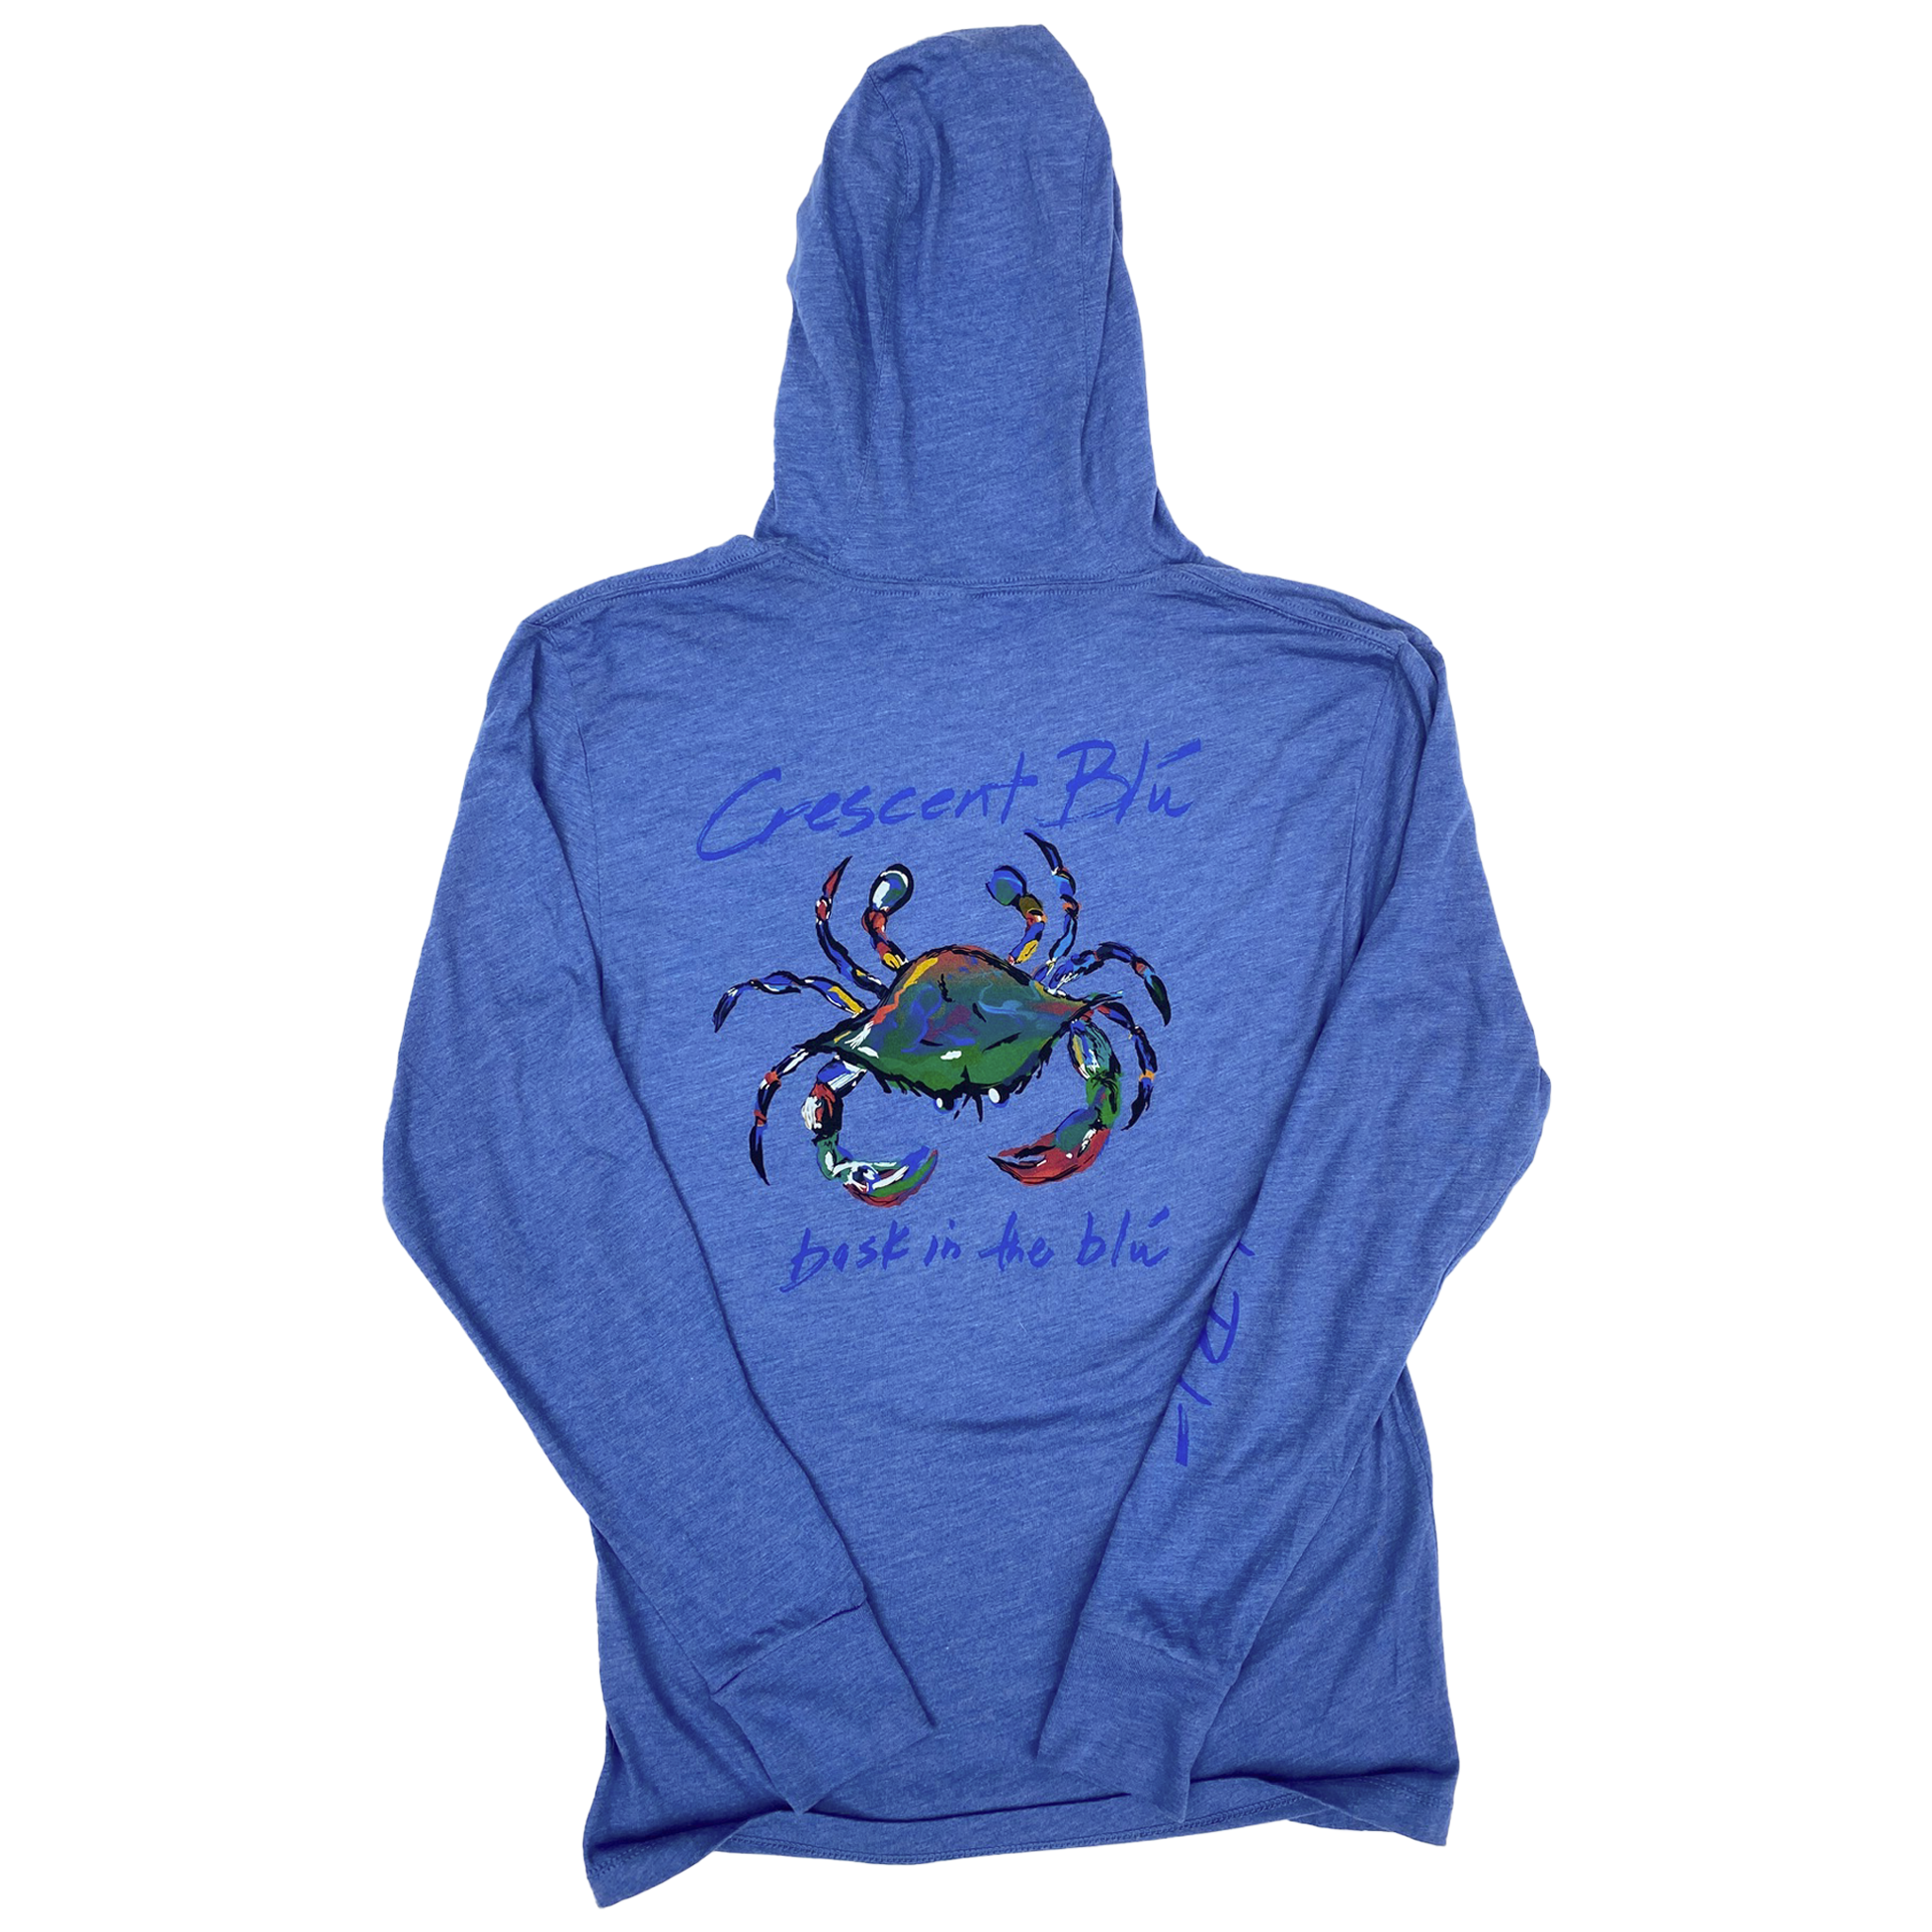 A colorful blue crab centered on the back of a blue hooded t-shirt